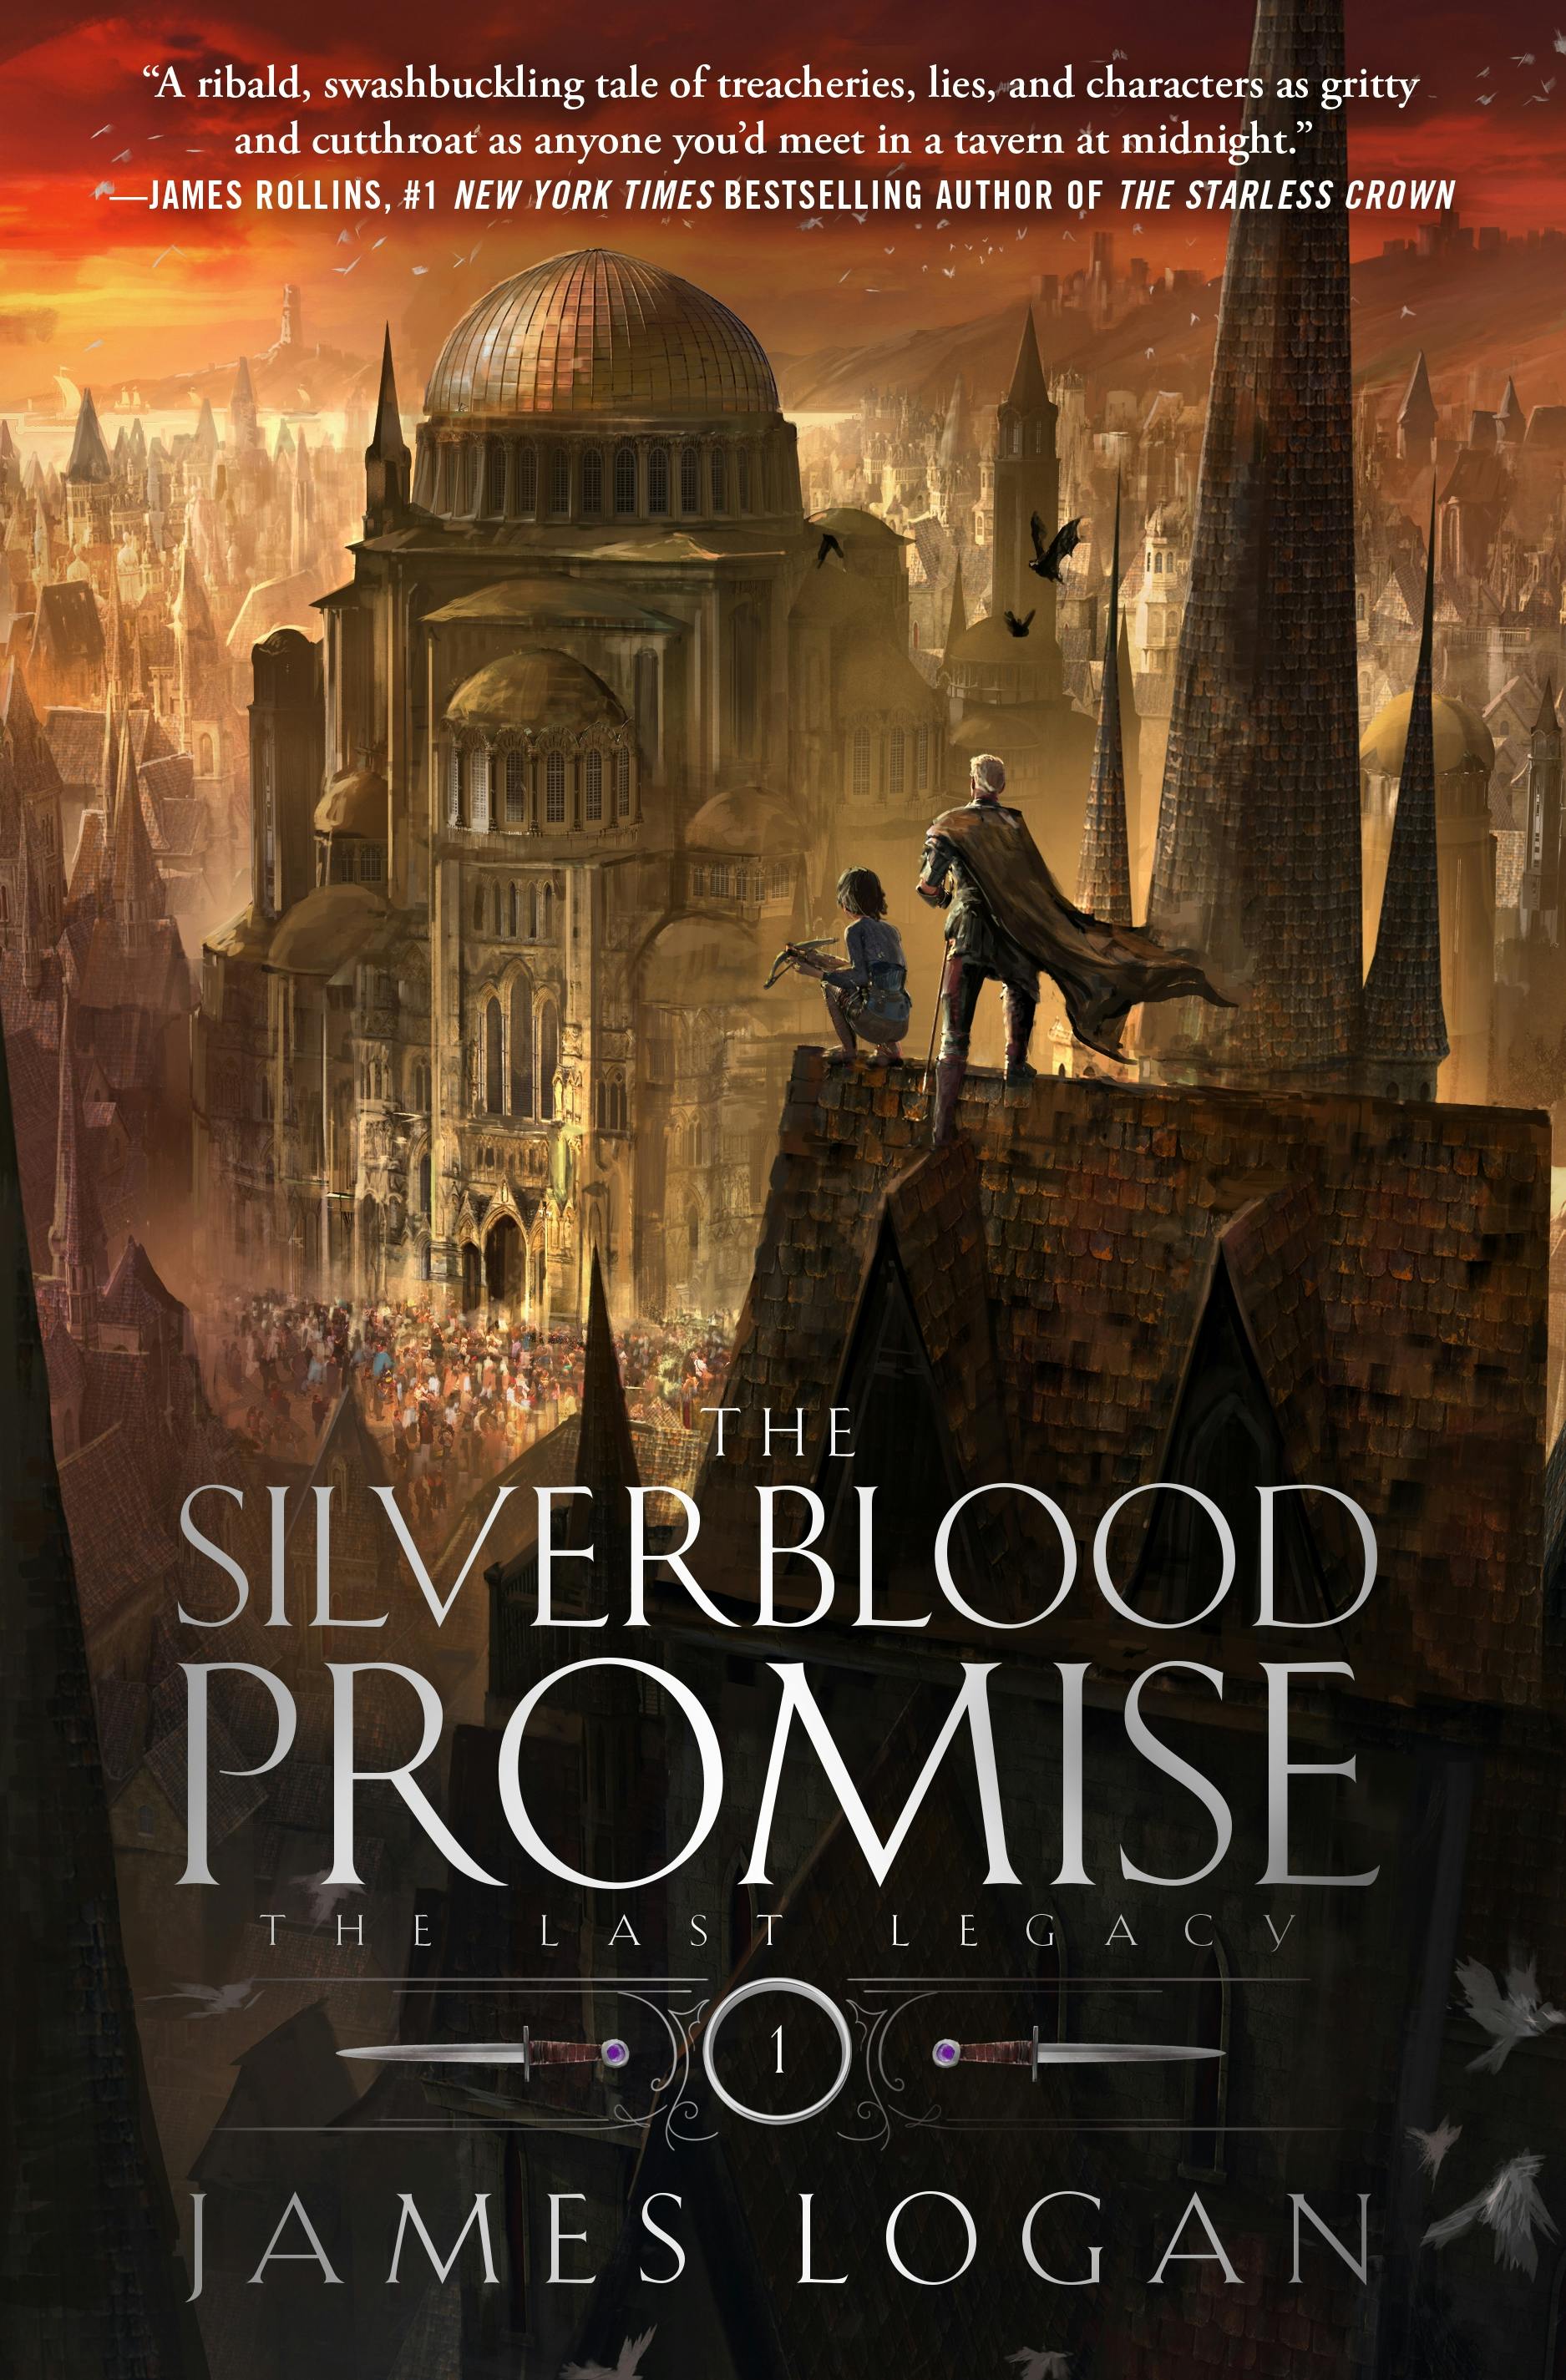 Cover for the book titled as: The Silverblood Promise